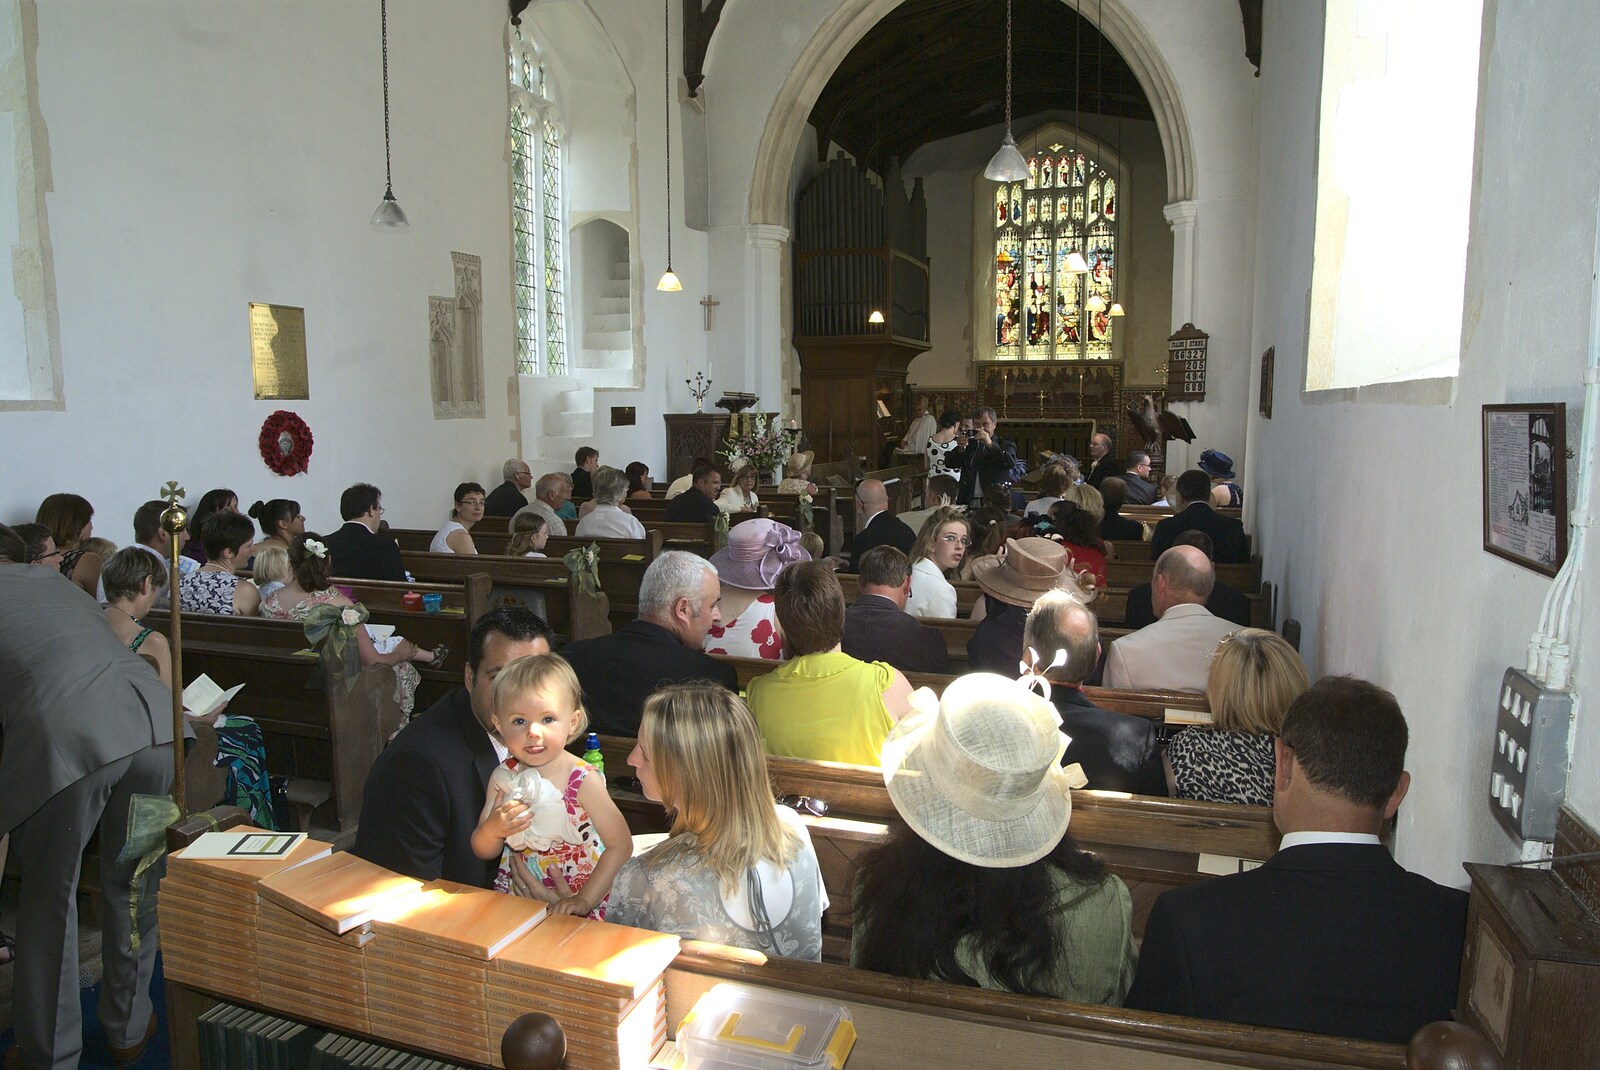 The crowd is ready in the church from Clive and Suzanne's Wedding, Oakley and Brome, Suffolk - 10th July 2010